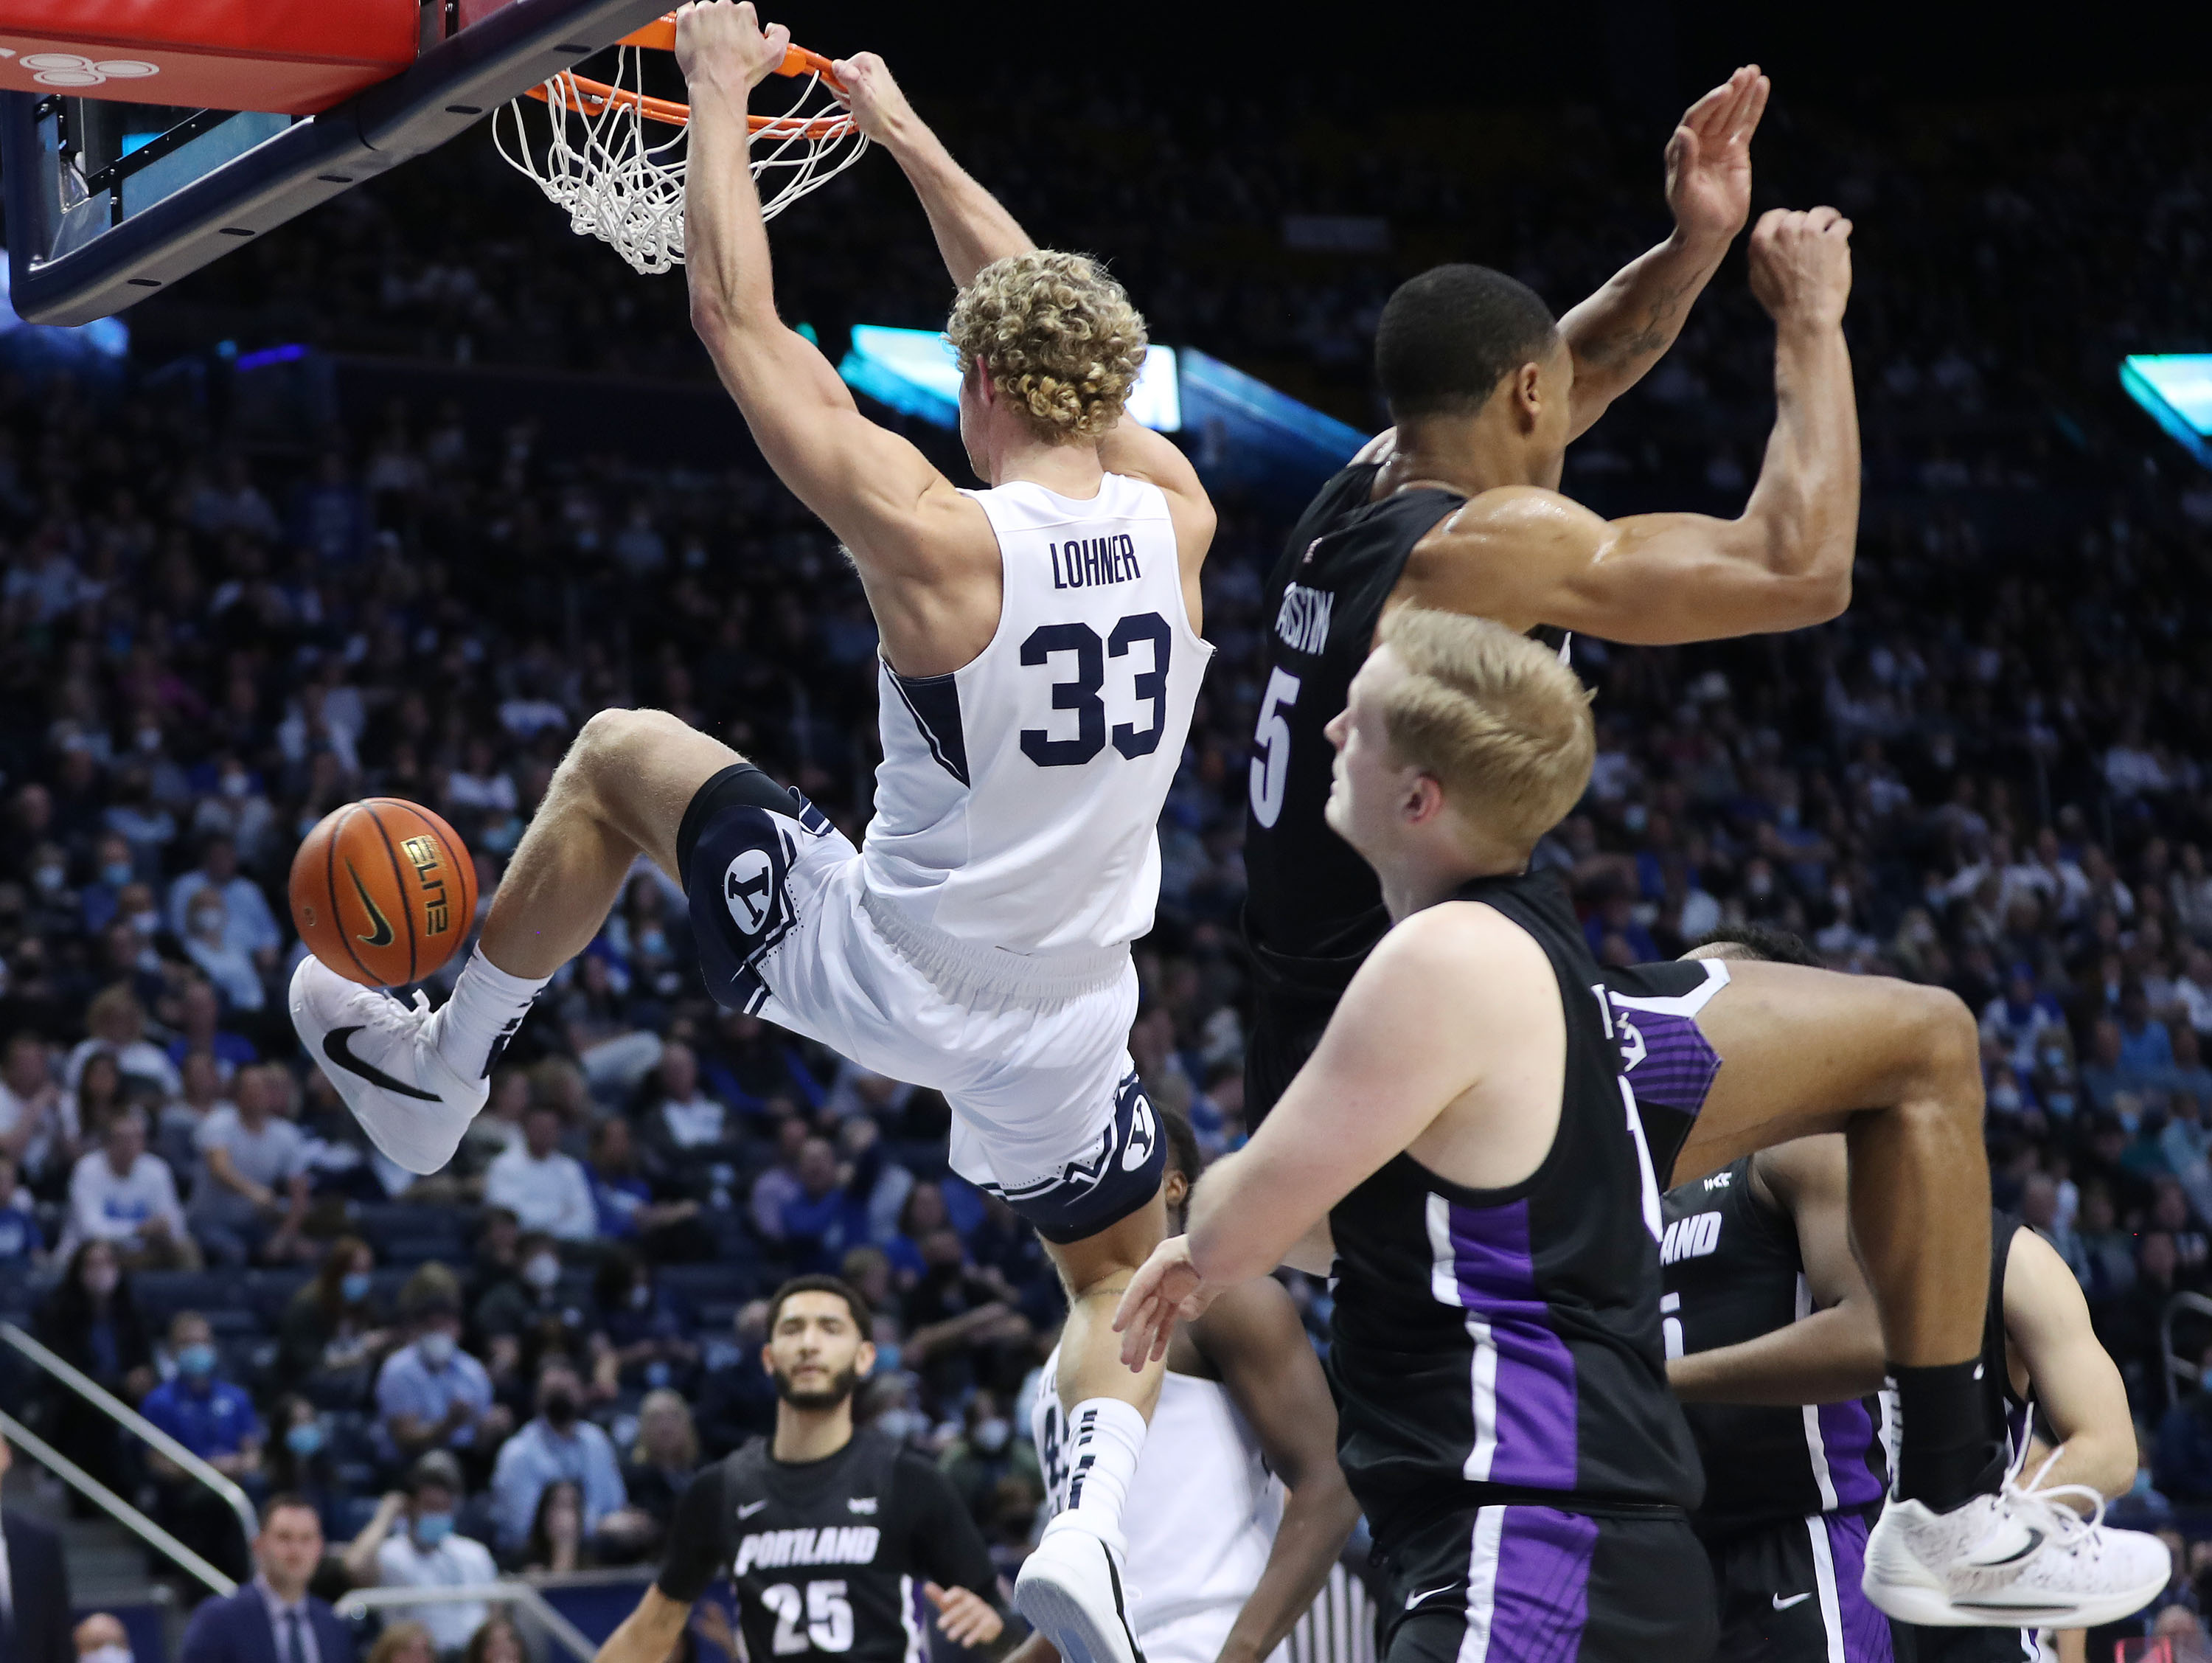 Brigham Young Cougars forward Caleb Lohner (33) dunks the ball in Provo on Saturday, Jan. 22, 2022.